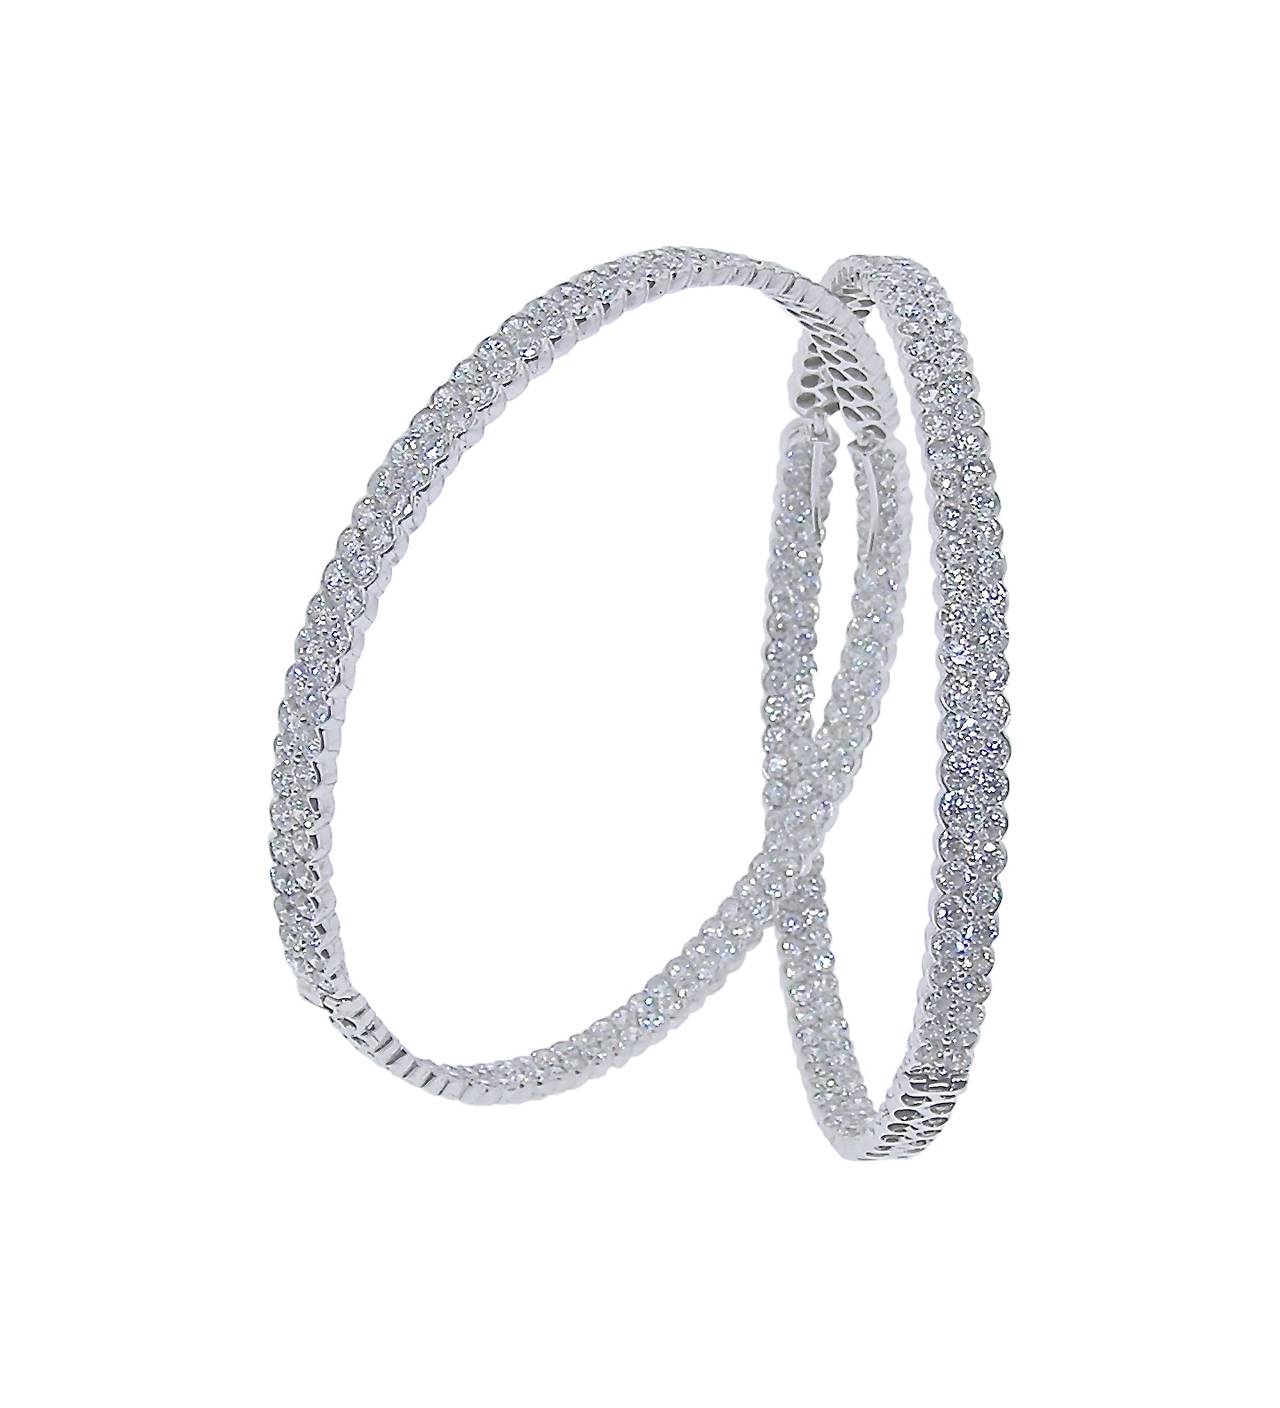 These 18K White Gold Hoops are 2 1/2 inches in diameter and feature nearly 15 Carats of Diamonds!  The two row earrings have Diamonds on the front and inside so you see Diamonds Diamonds Diamonds where ever you look!

Fabricated intricately so you